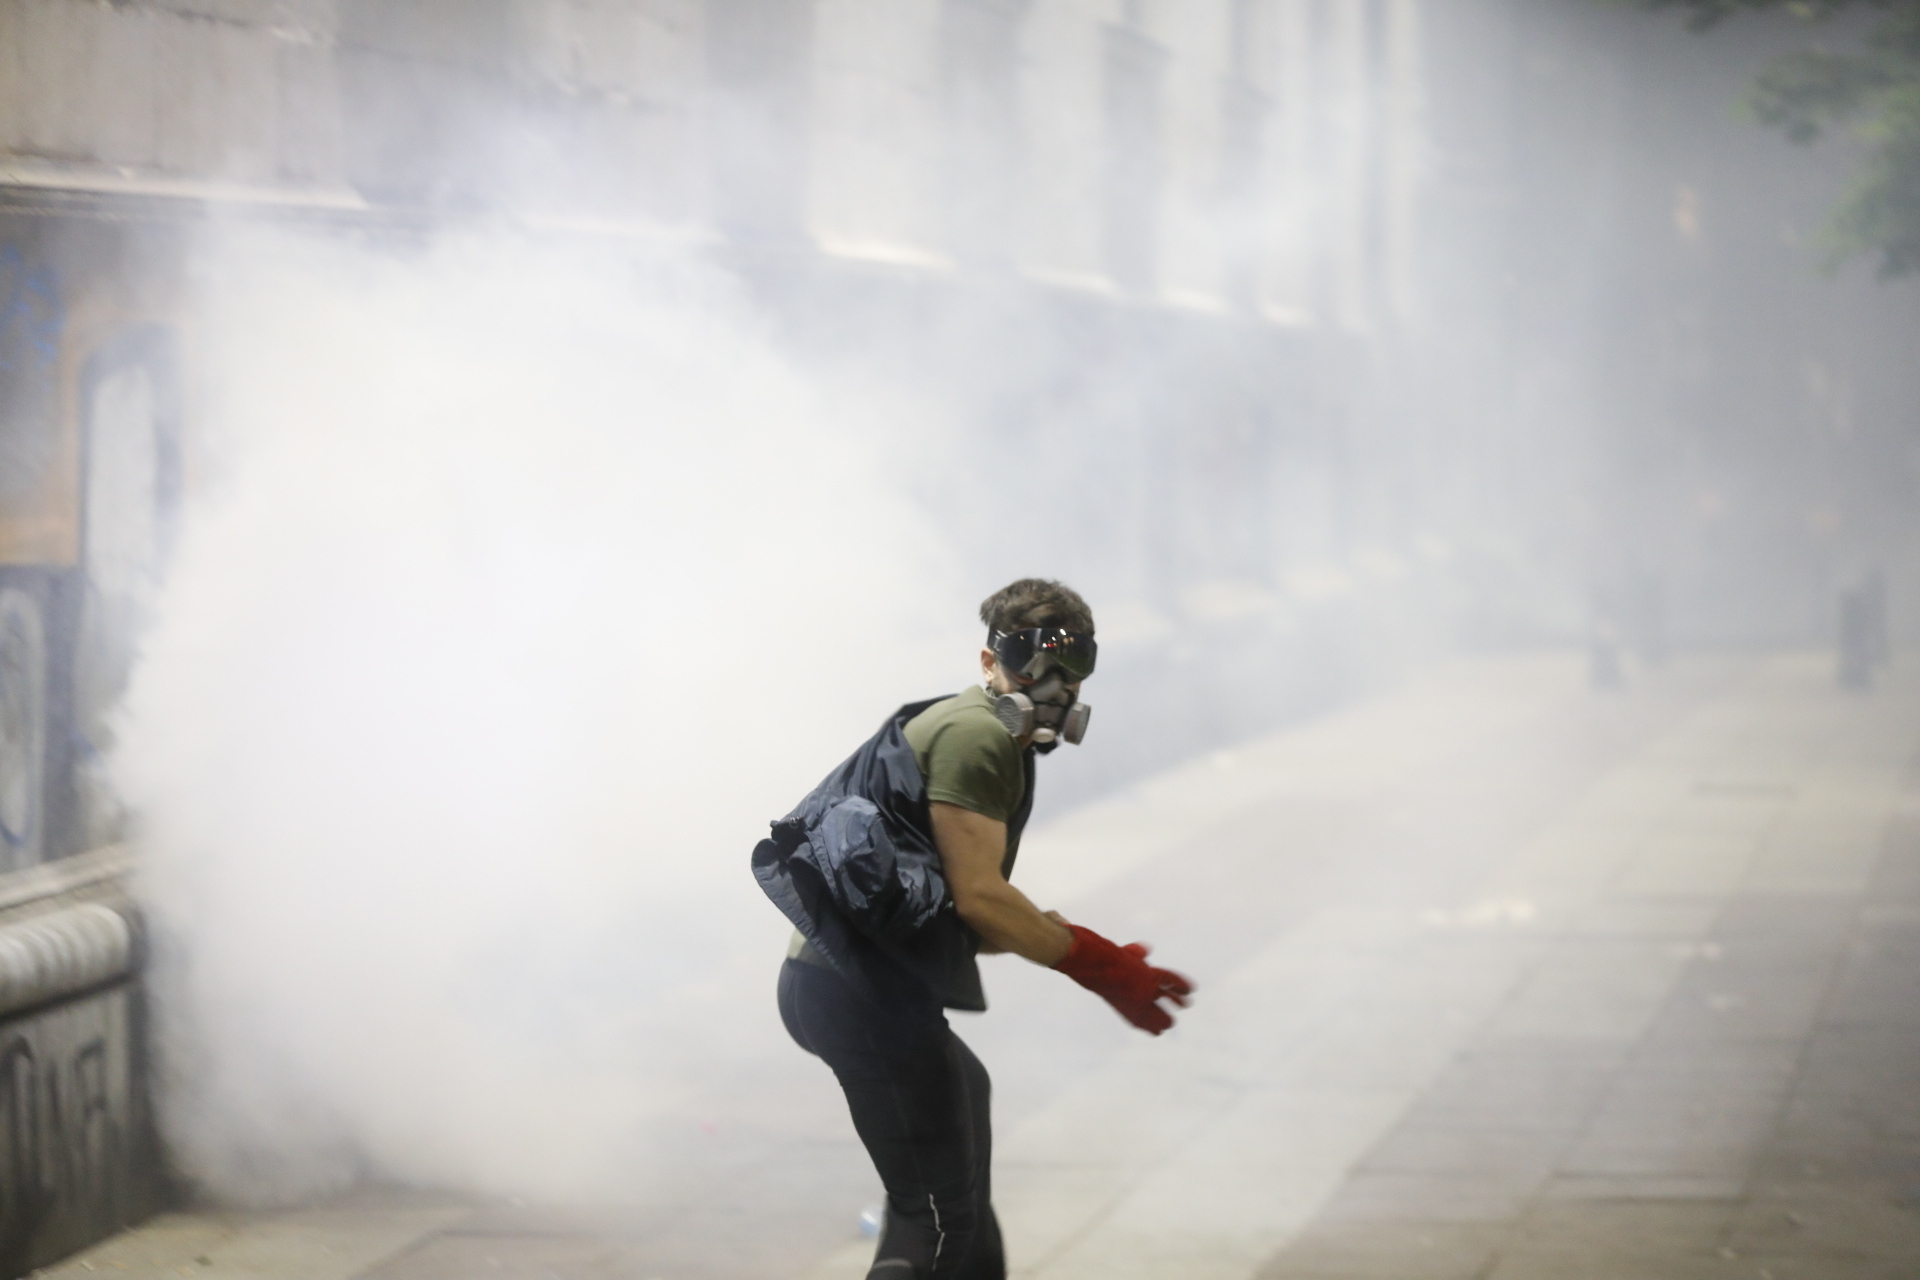 A protester wearing a gas mask runs through the streets of Tbilisi surrounded by tear gas.